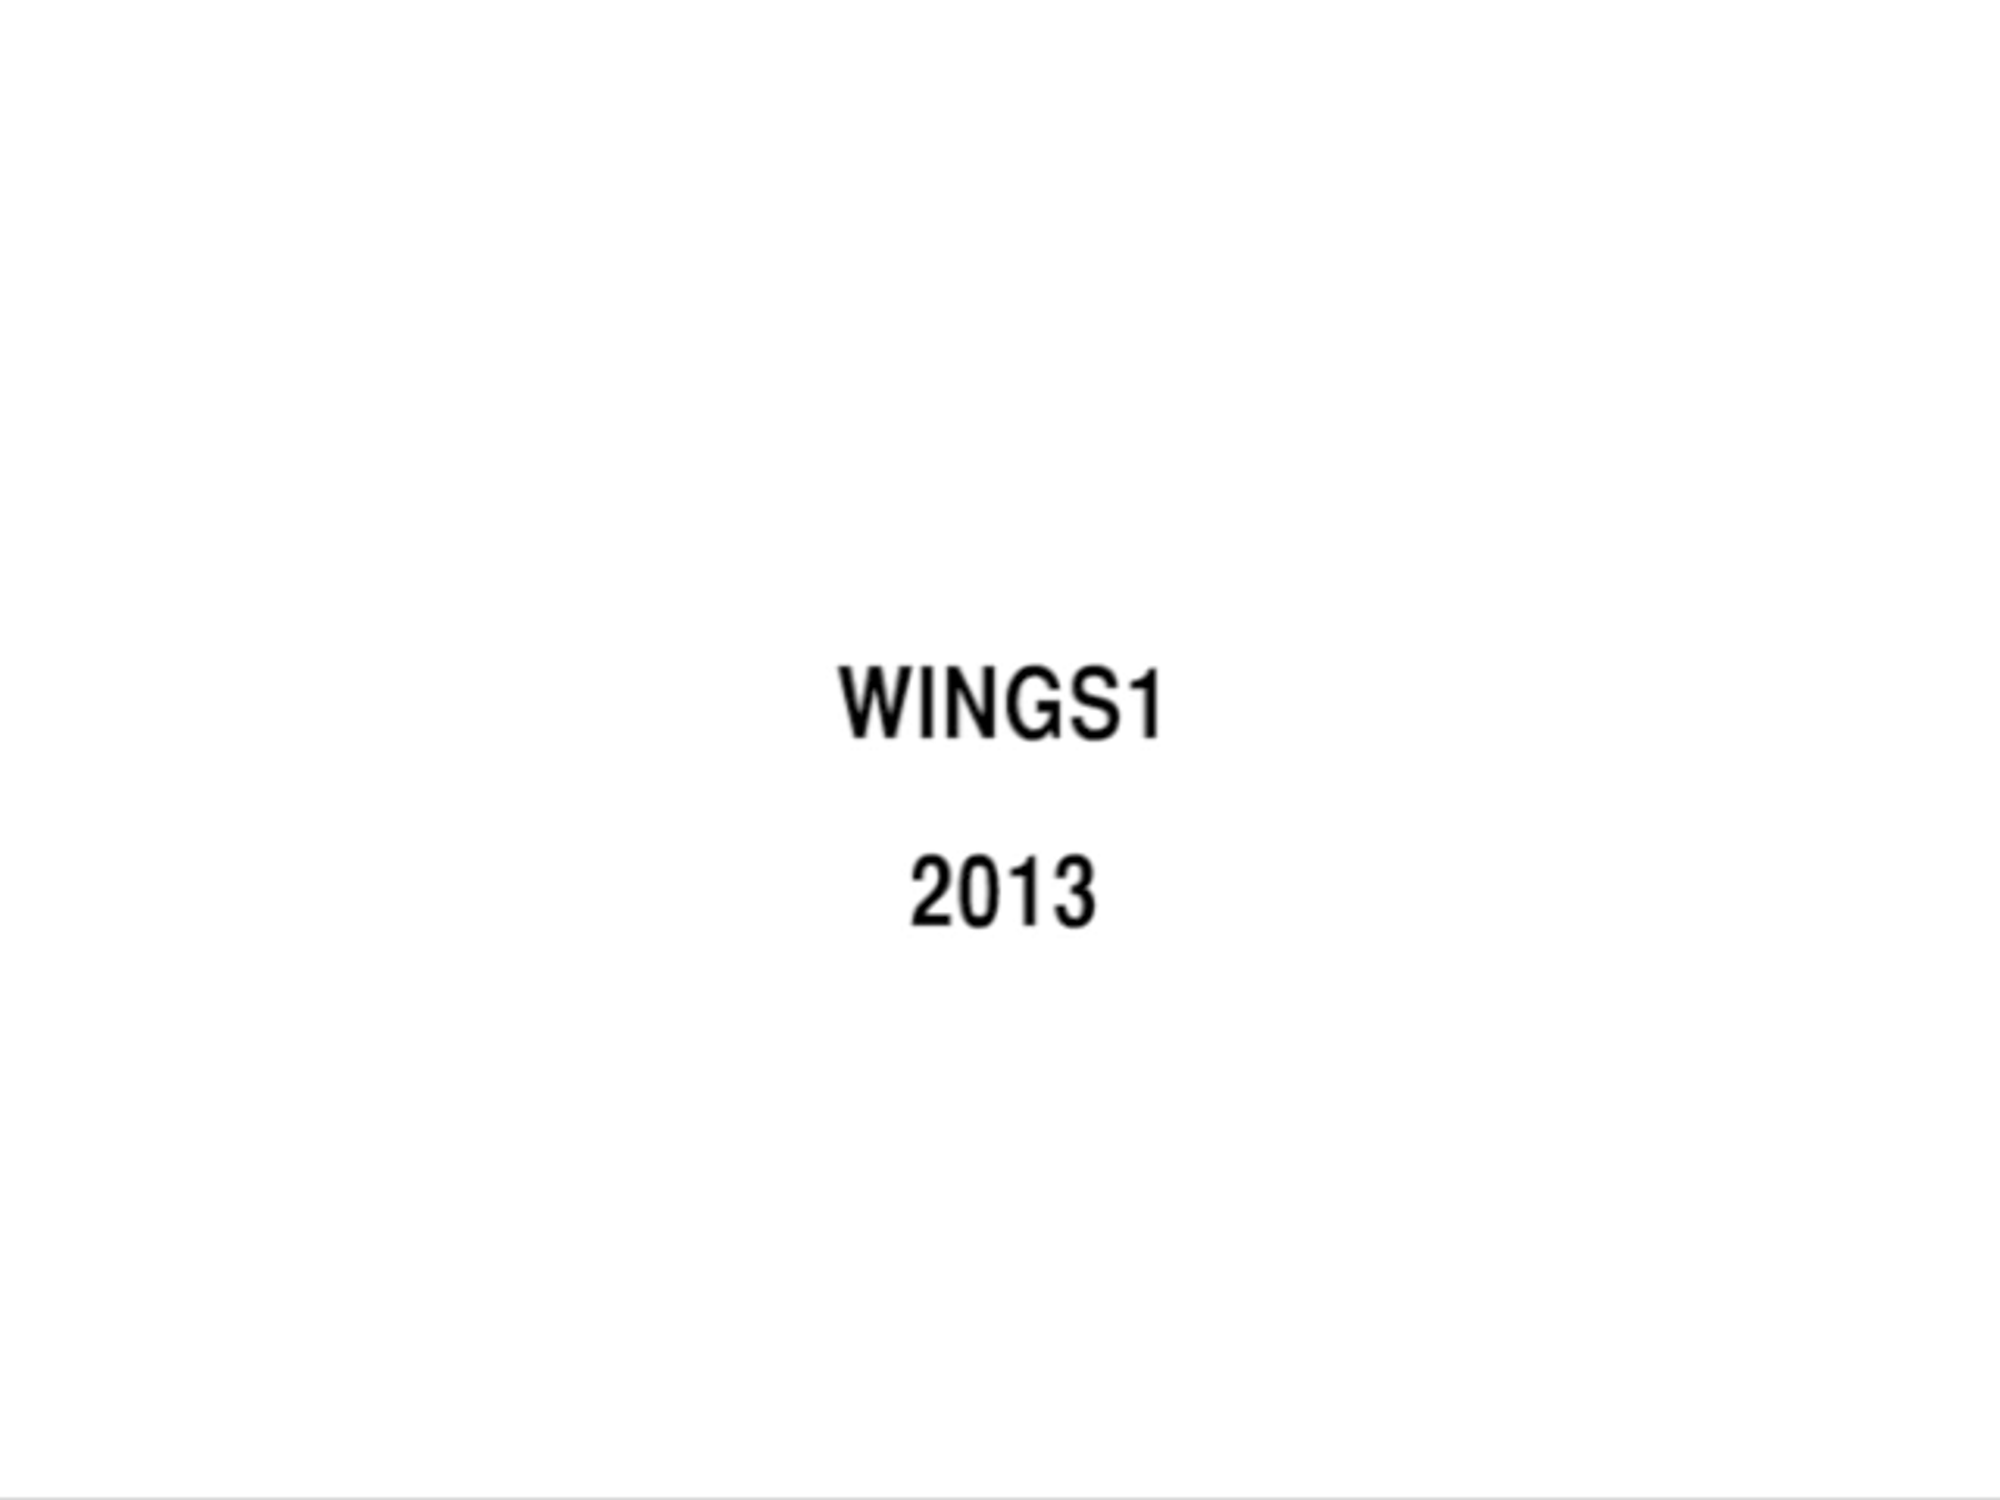 A title card that reads "WINGS1" and then "2013" below